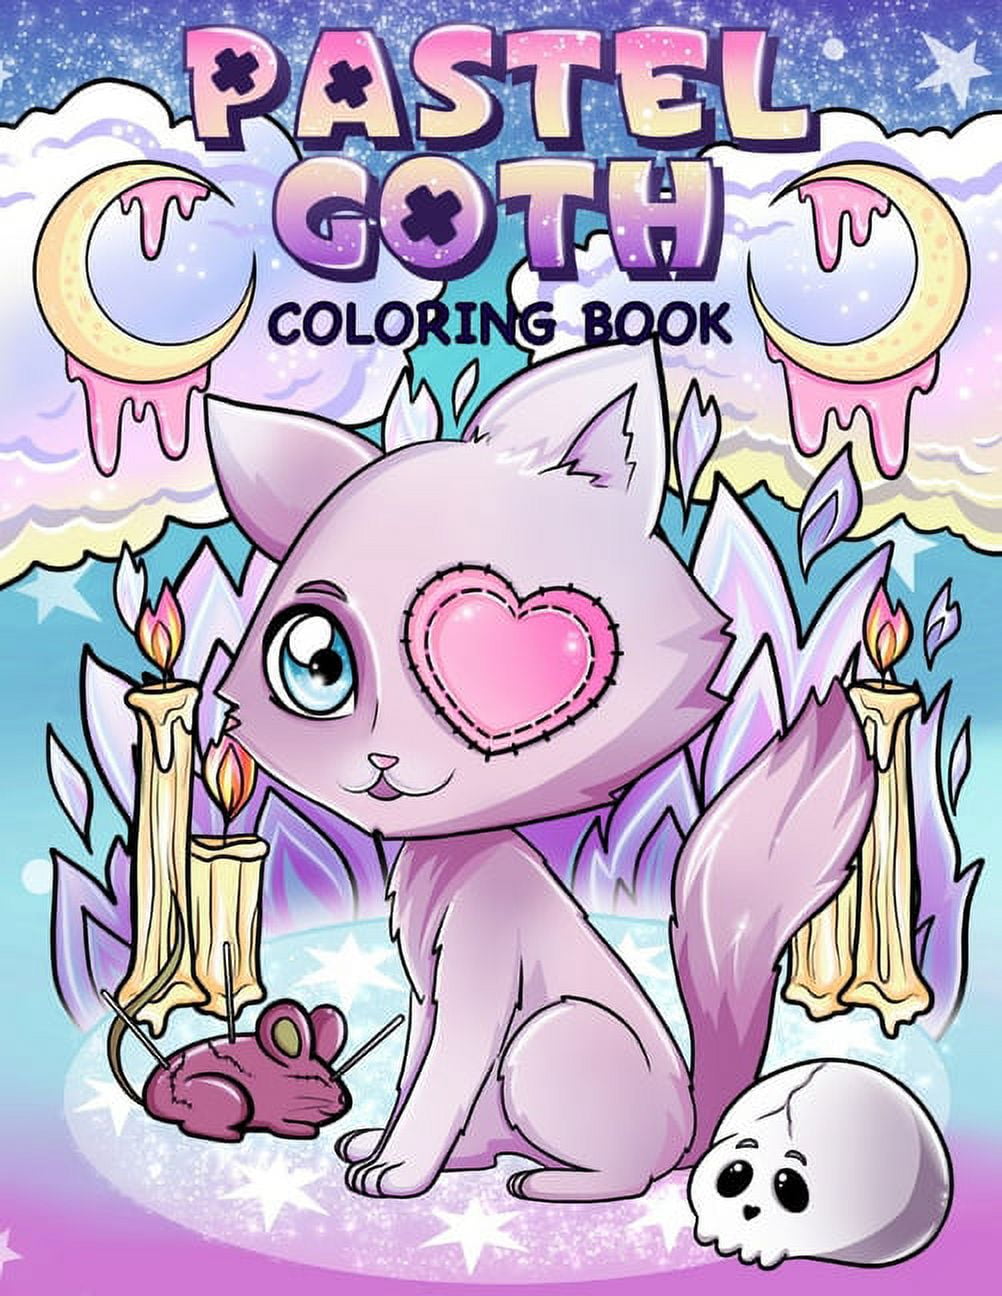  Witchy Aesthetic Coloring Book for Teens & Adults: Kawaii Witch  Craft Pastel Goth Coloring Book for Adults Preppy Witchy Stuff - Color Boho  Crystals  Cute Creepy Vibes (Color your Aesthetic!)